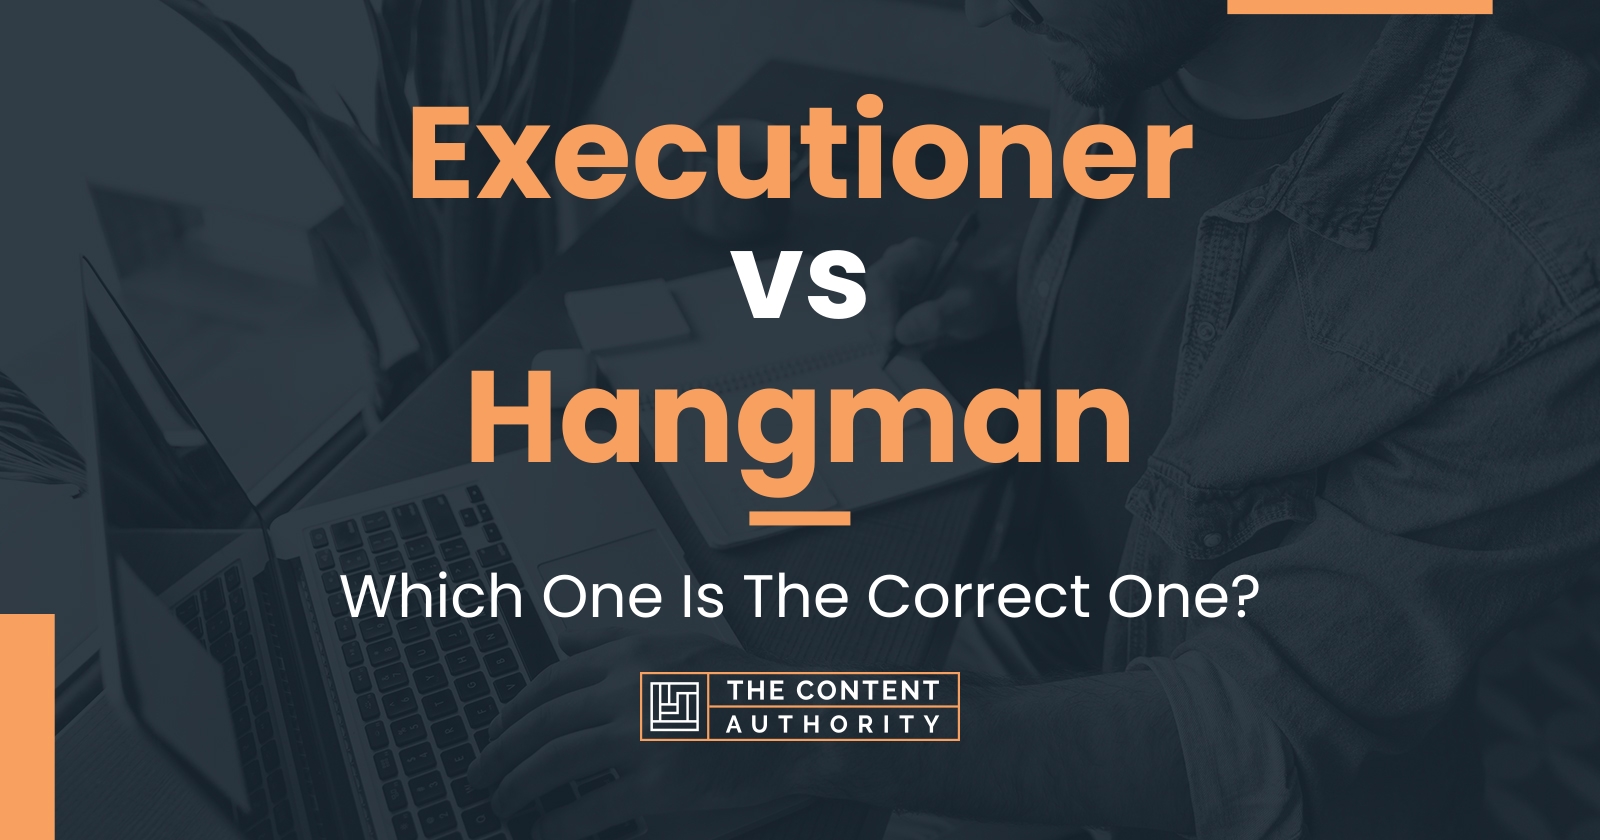 Executioner vs Hangman: Which One Is The Correct One?